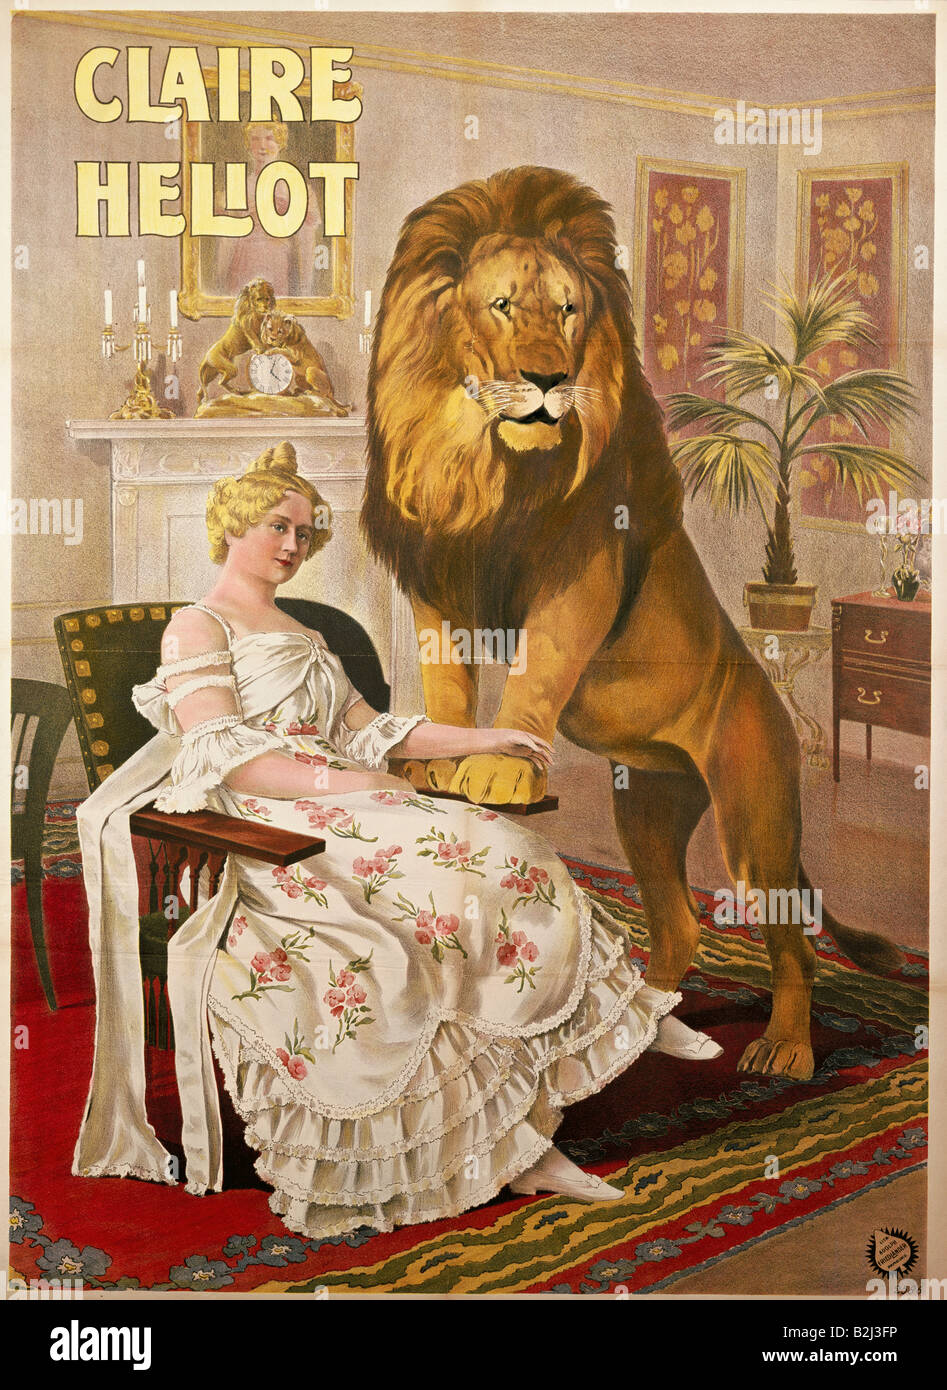 advertising, circus, poster showing the lion tamer 'Claire Heliot', colour lithograph, Adolph Friedlaender publishing house, Hamburg, Germany, 1903, Stock Photo